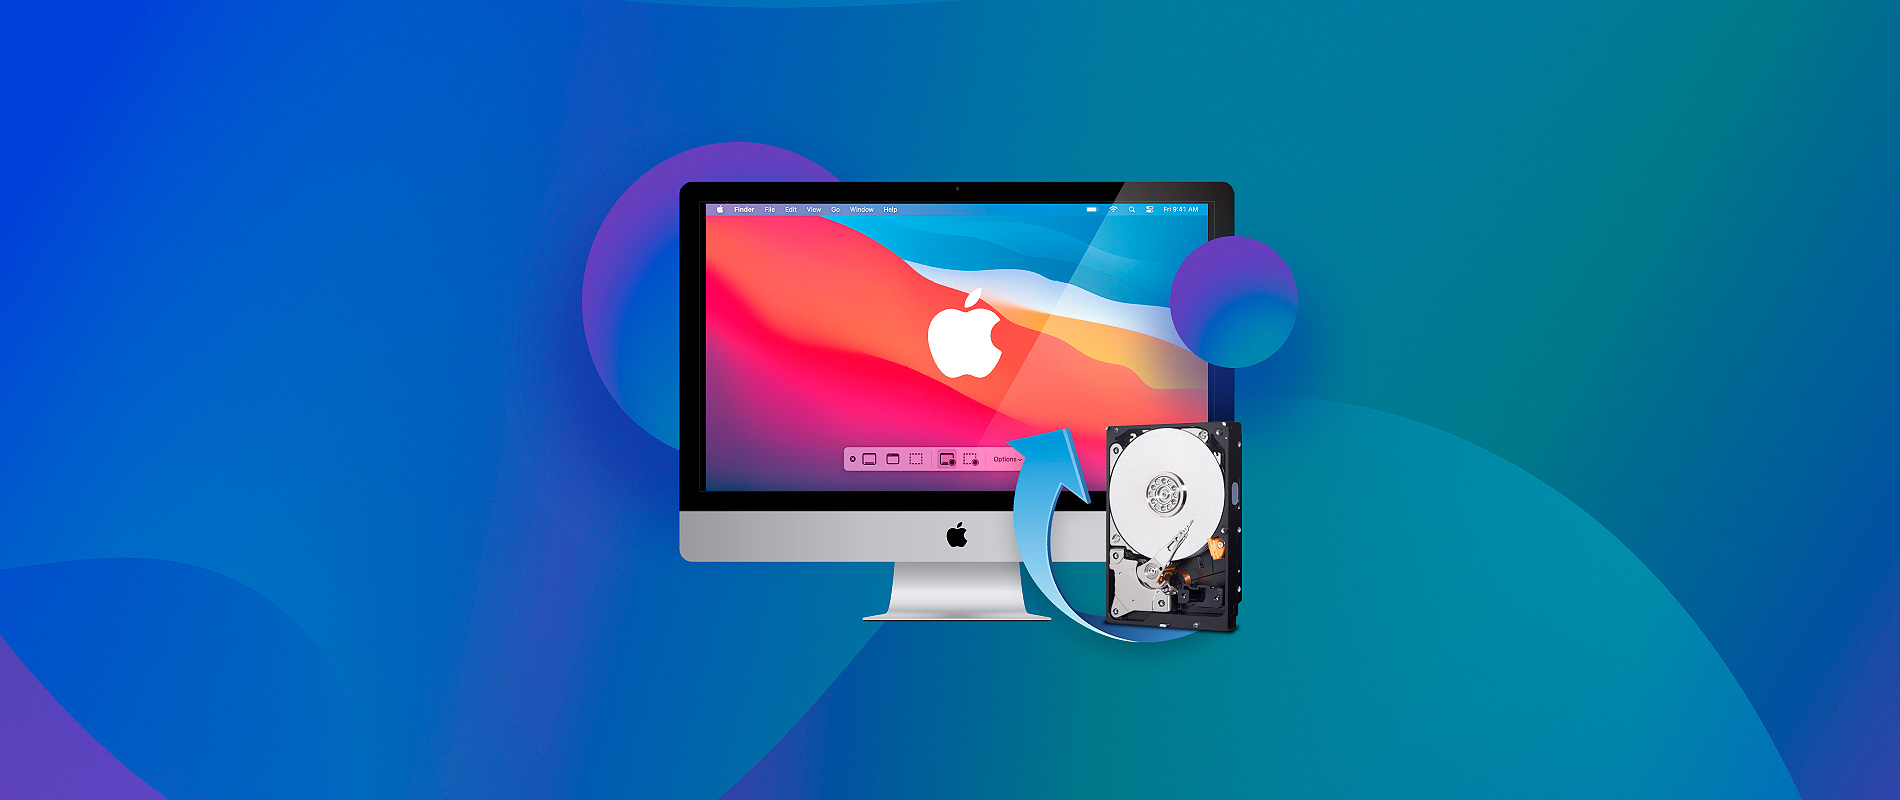 photo software for the mac